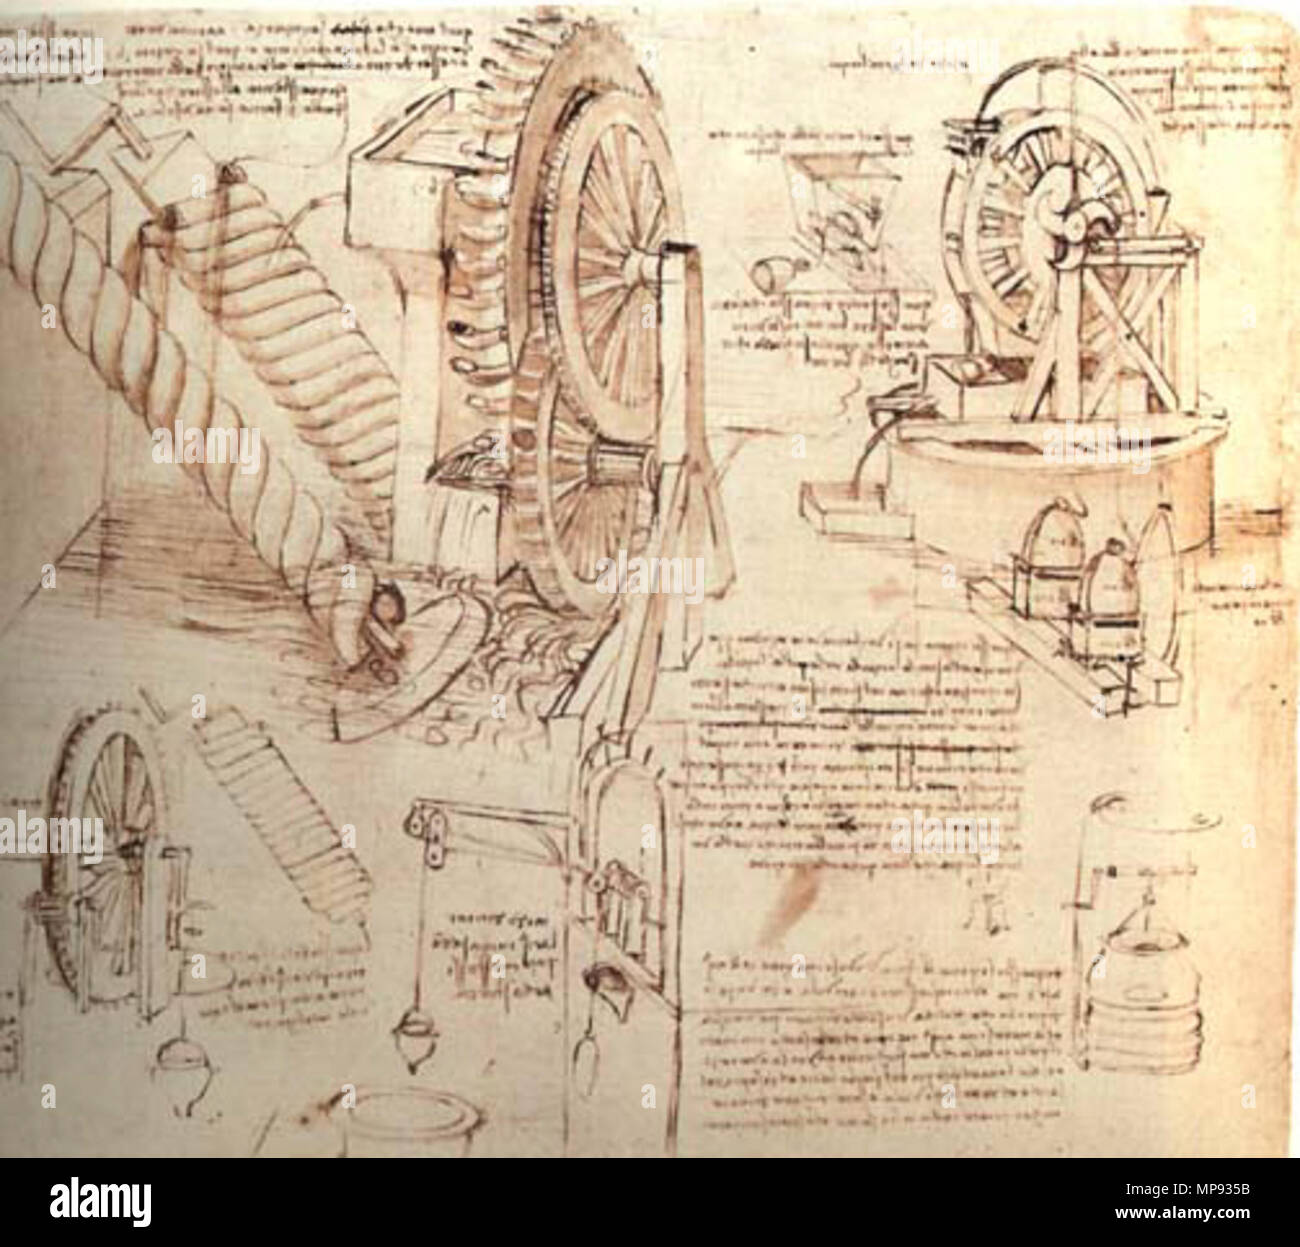 English: Drawings of Water Lifting Devices   between 1480 and 1482.   803 Leonardo da vinci, Drawings of Water Lifting Devices Stock Photo